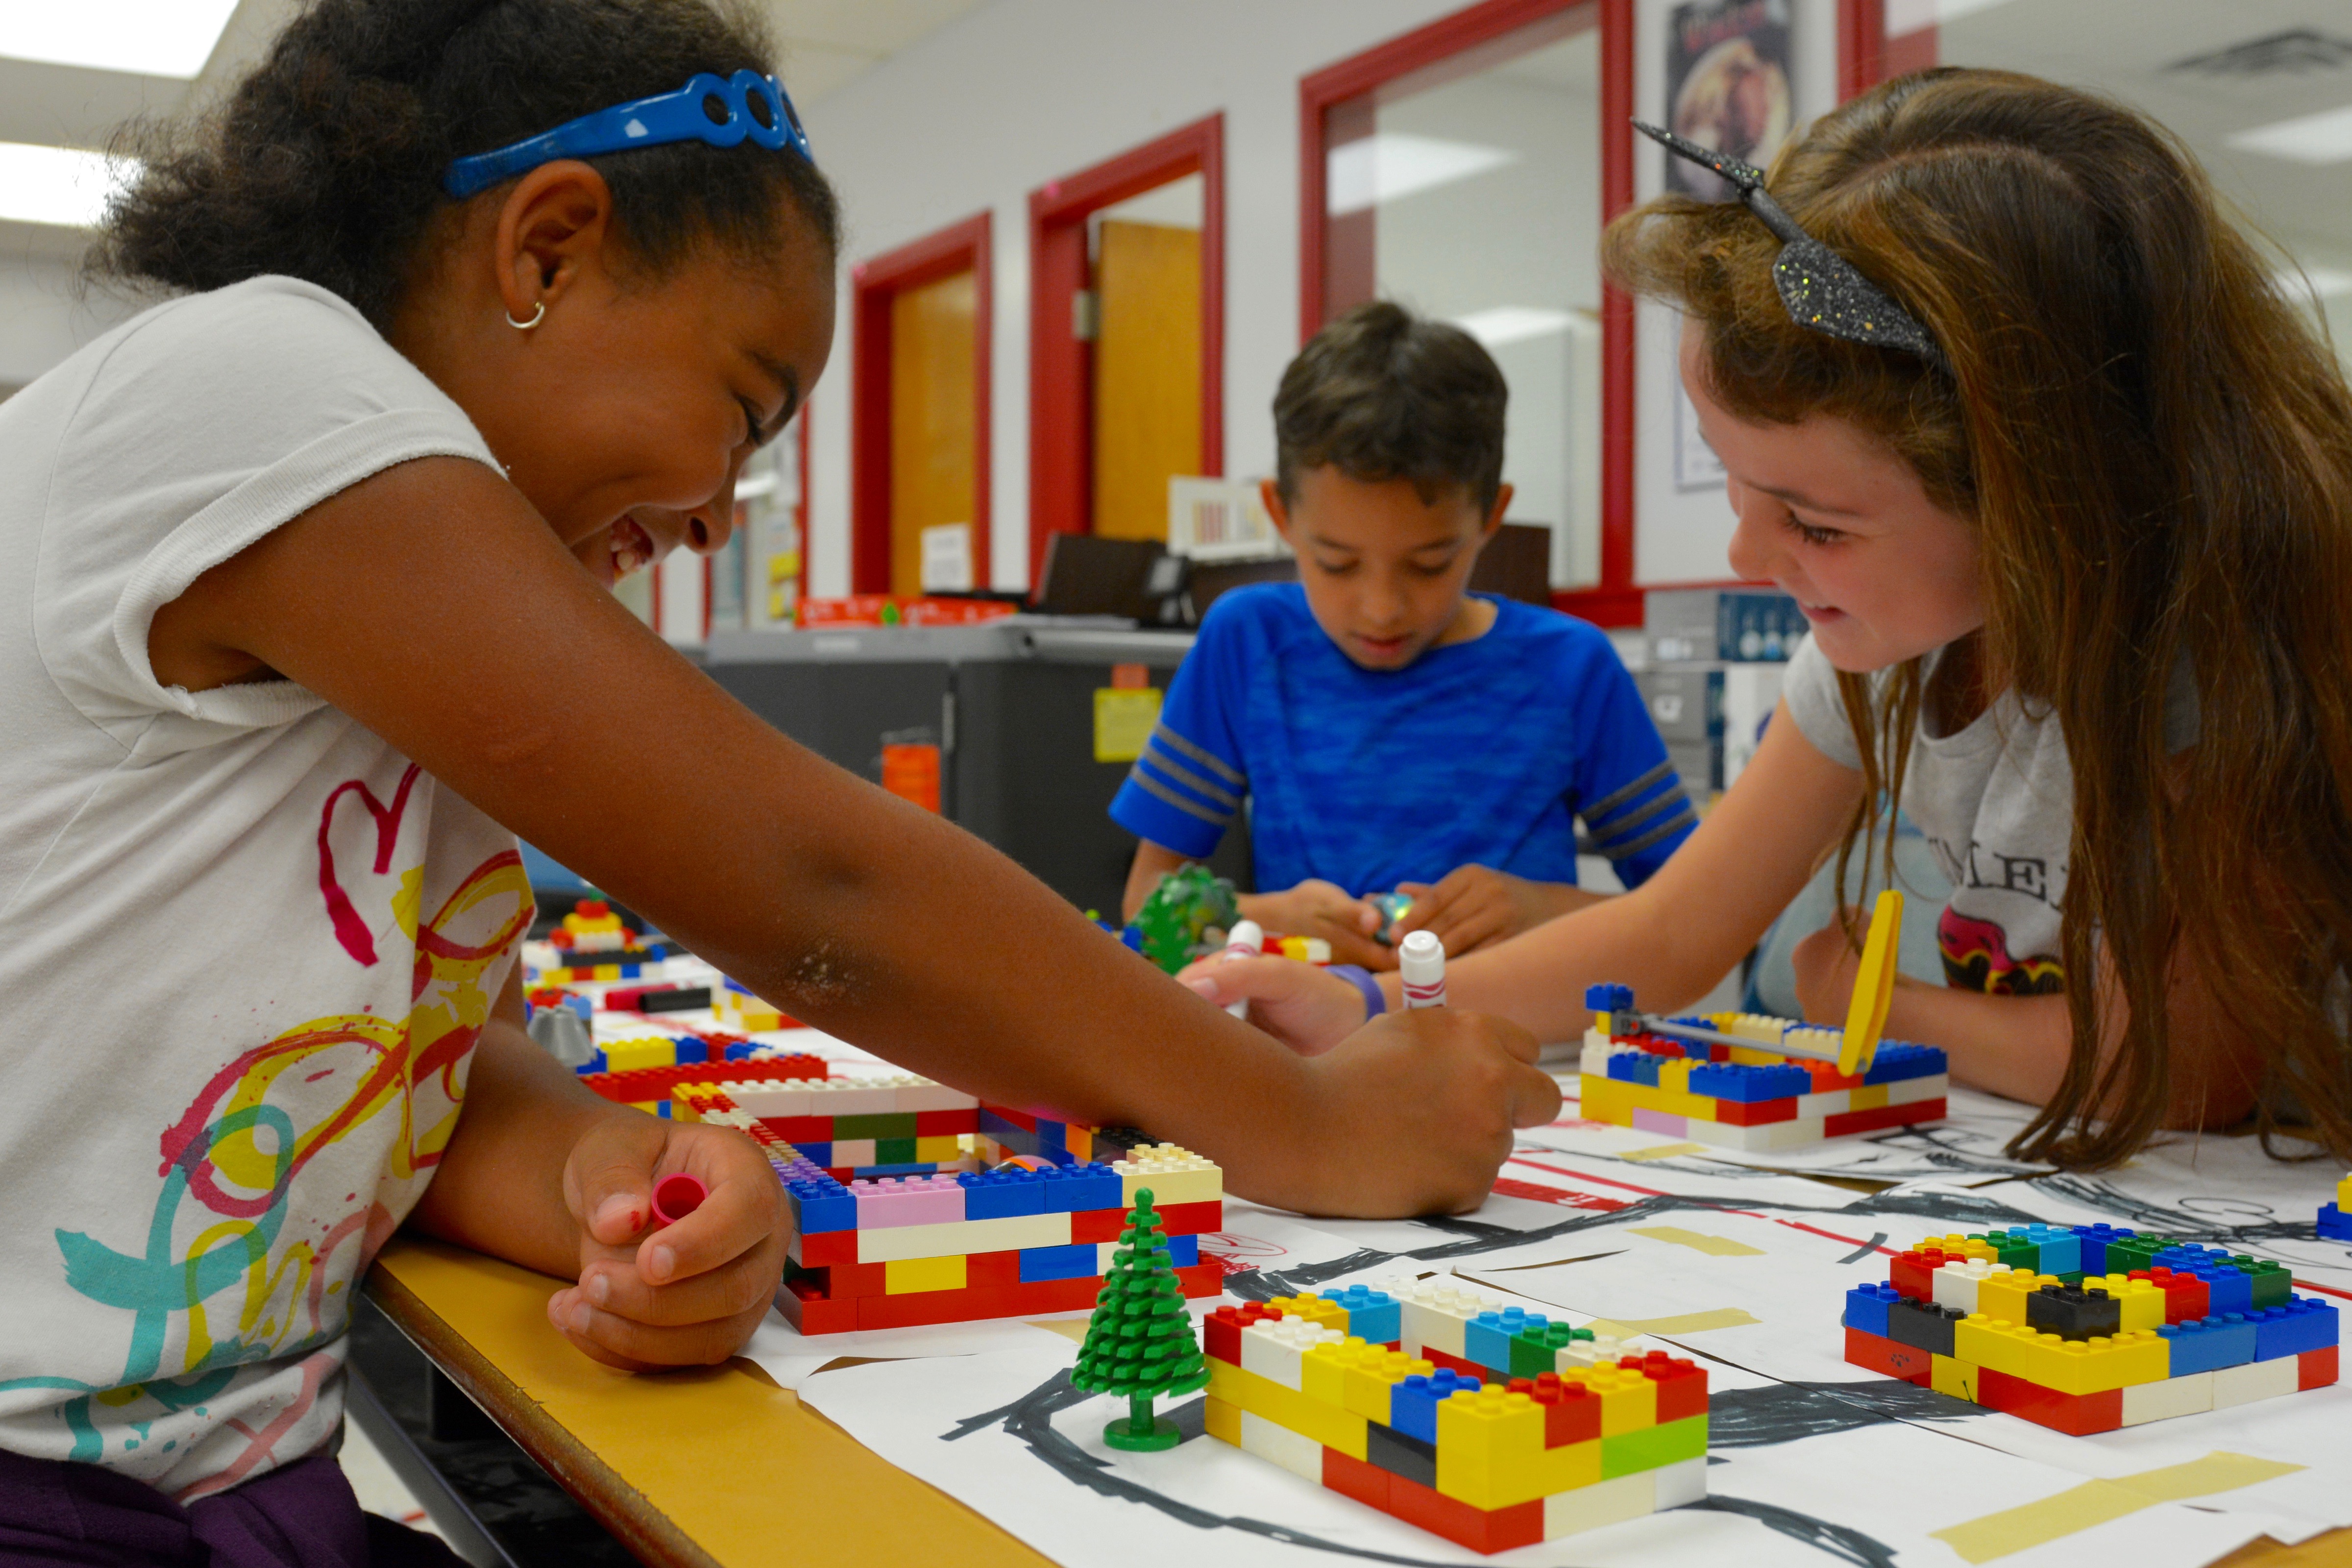 Students Laney, Madelynn and Darius complete an activity with Legos, colouring markers and ozo bots to demonstrate the importance of engineering.